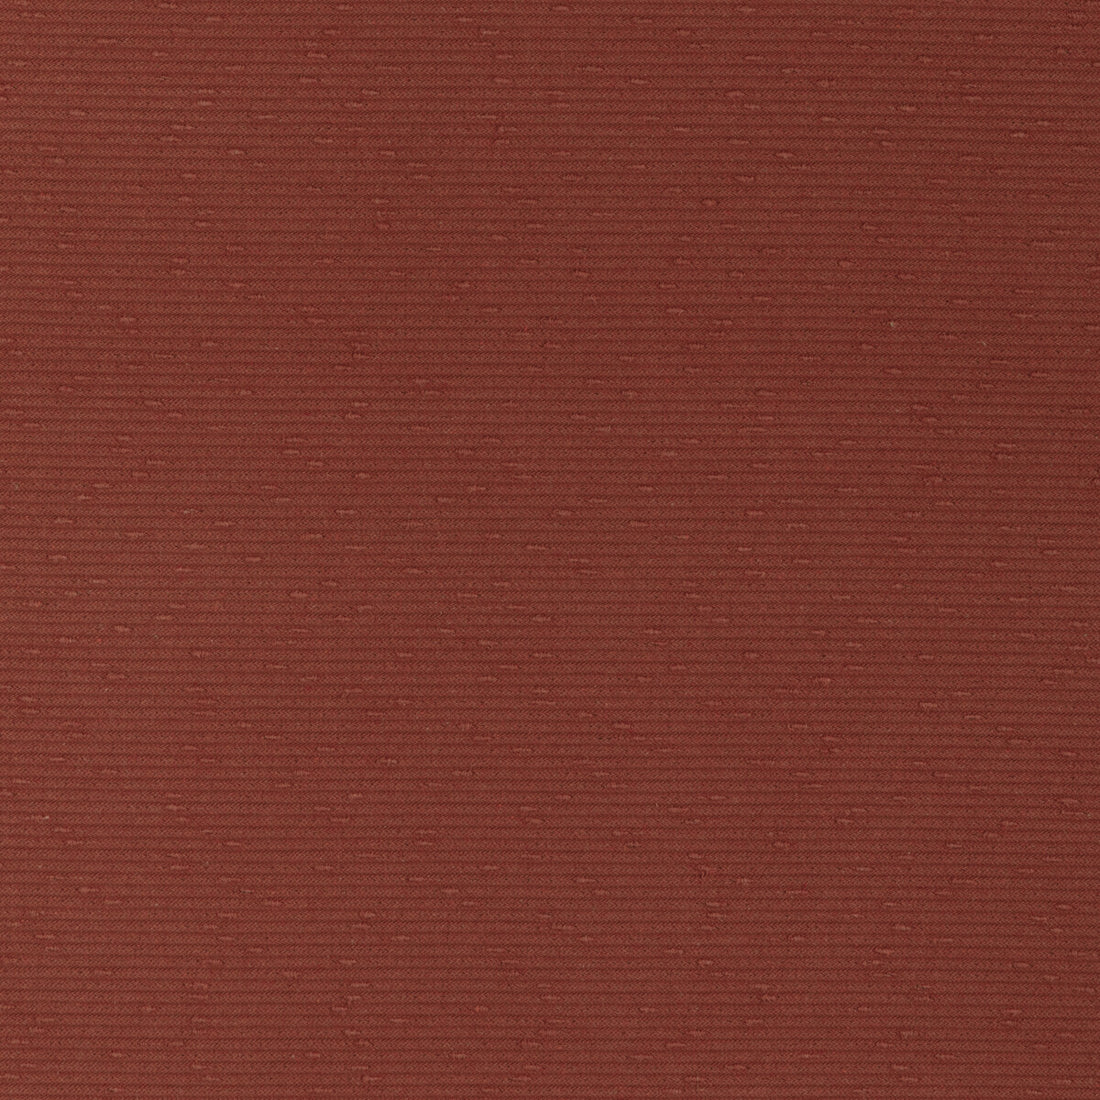 Cabochon fabric in rust color - pattern GWF-3799.24.0 - by Lee Jofa Modern in the Kelly Wearstler VIII collection